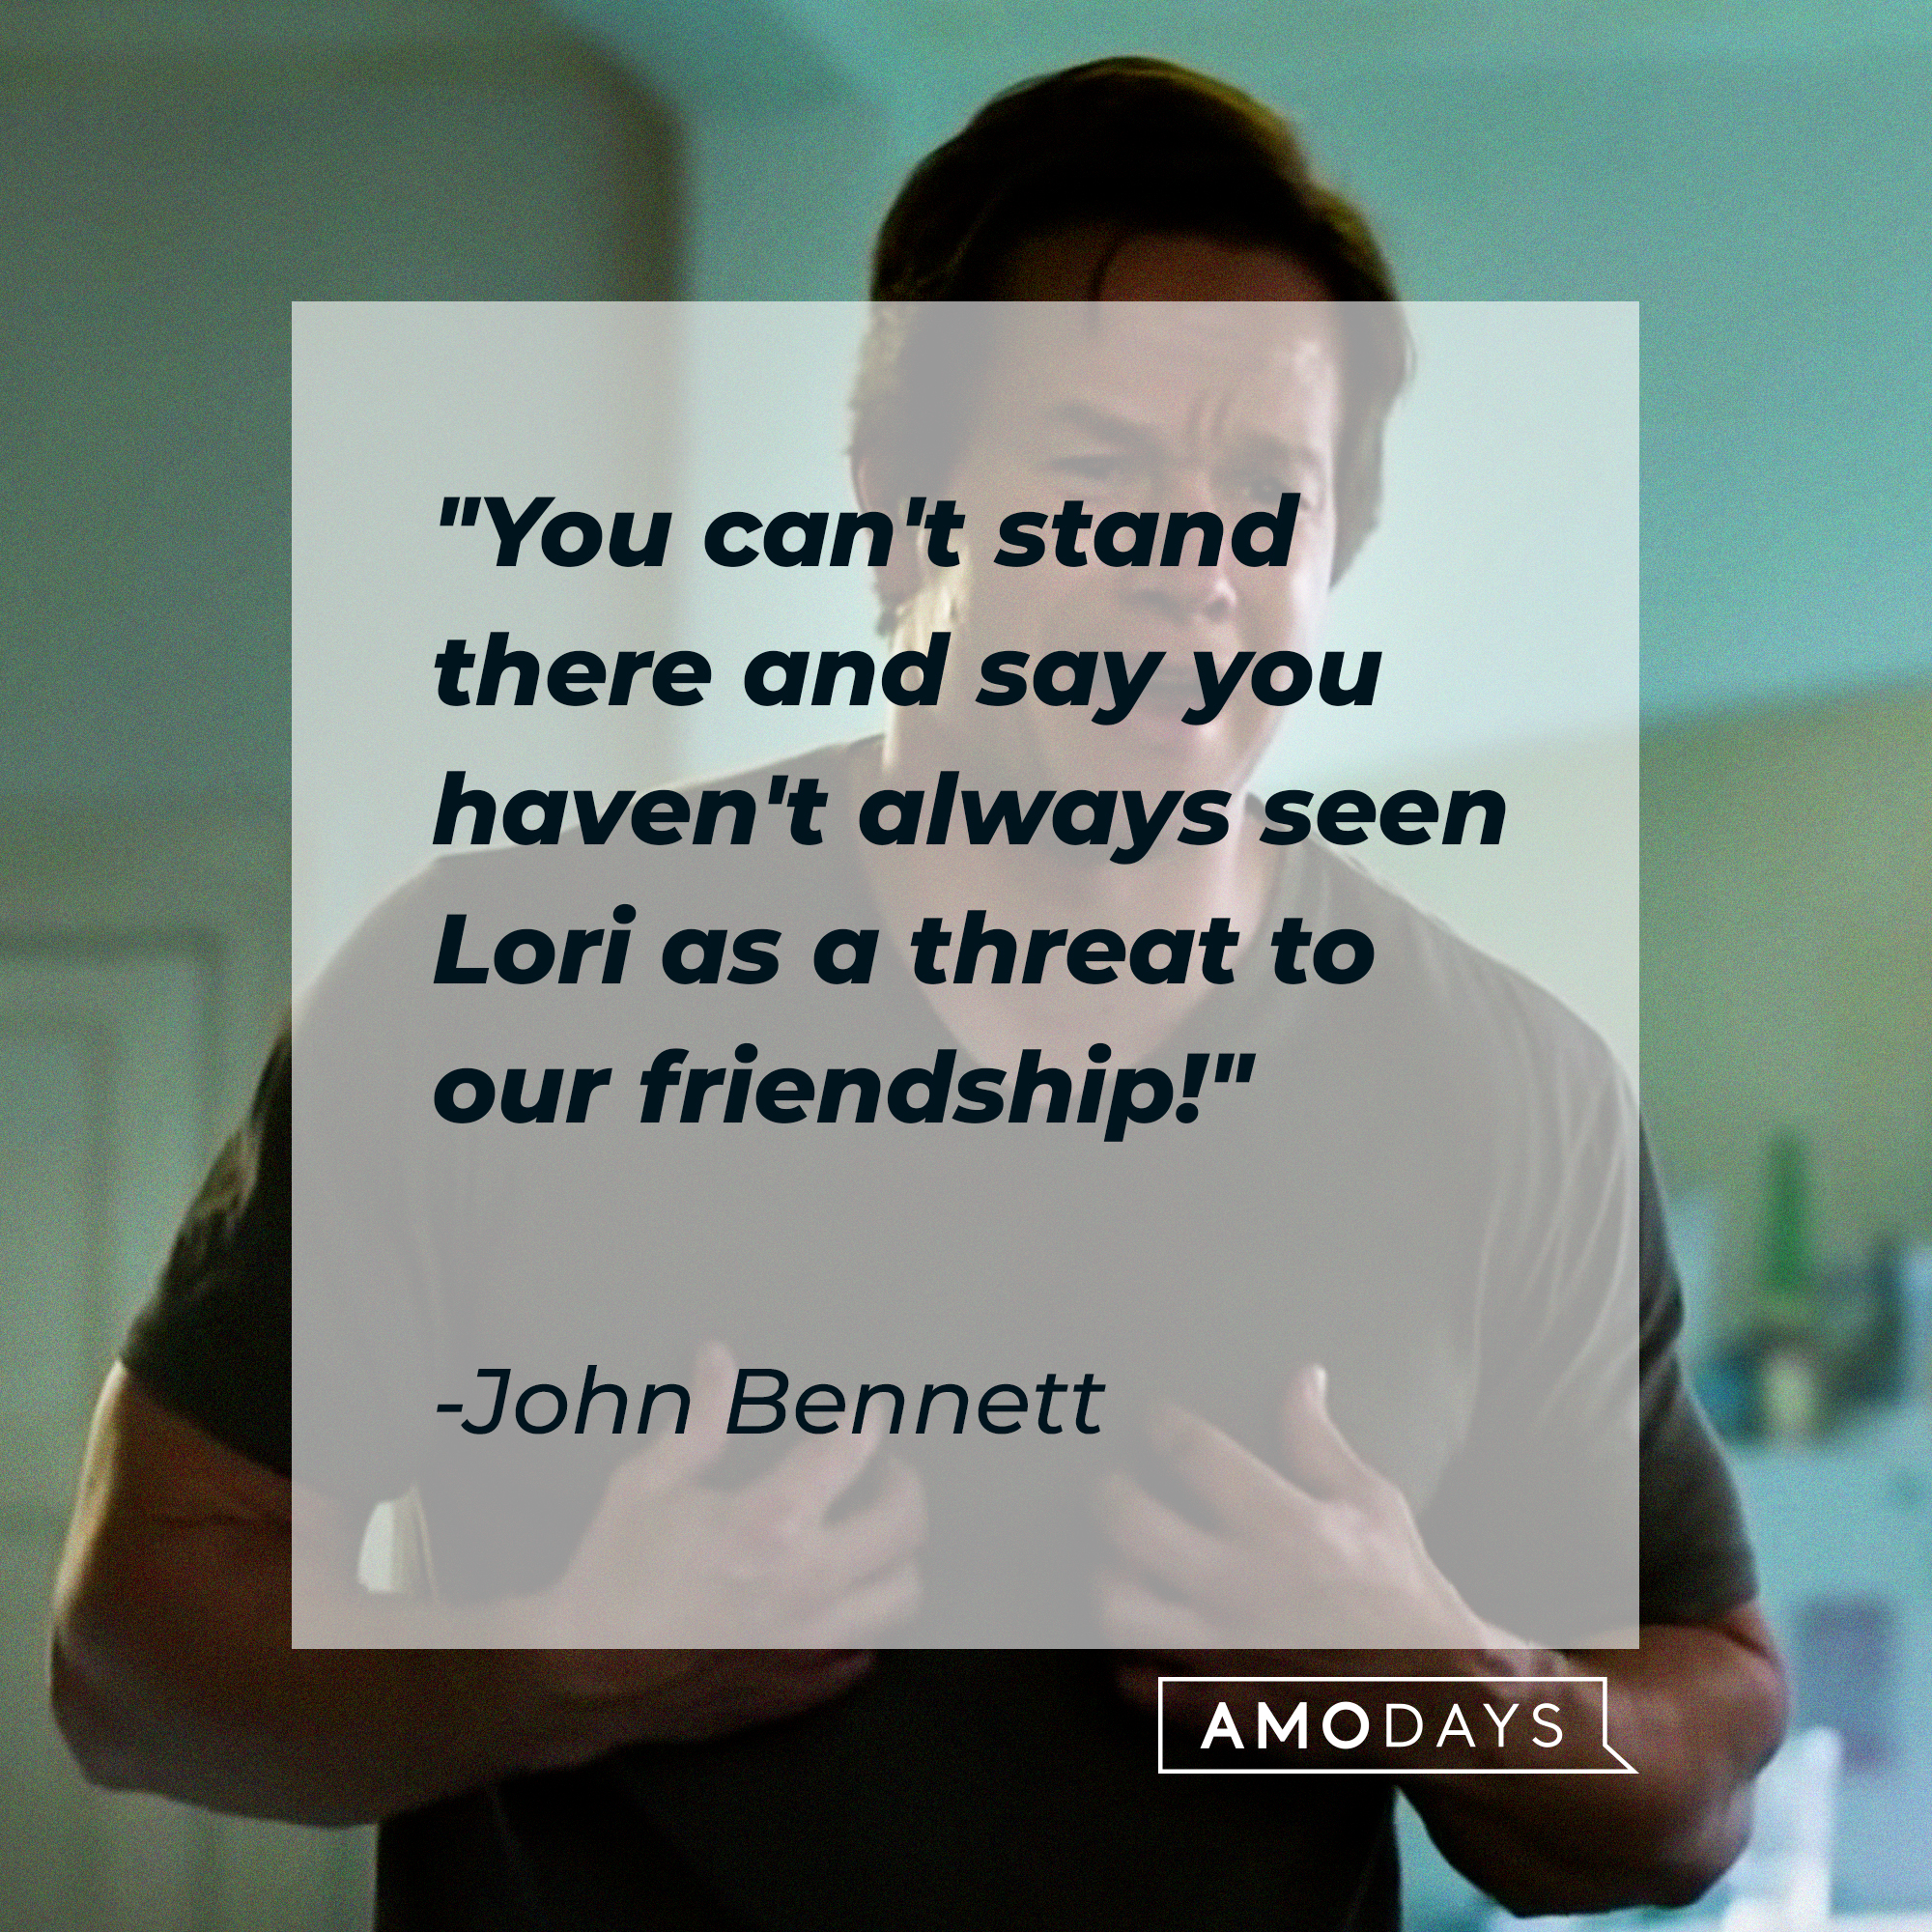 John Bennett's quote: "You can't stand there and say you haven't always seen Lori as a threat to our friendship!" | Source: facebook.com/tedisreal